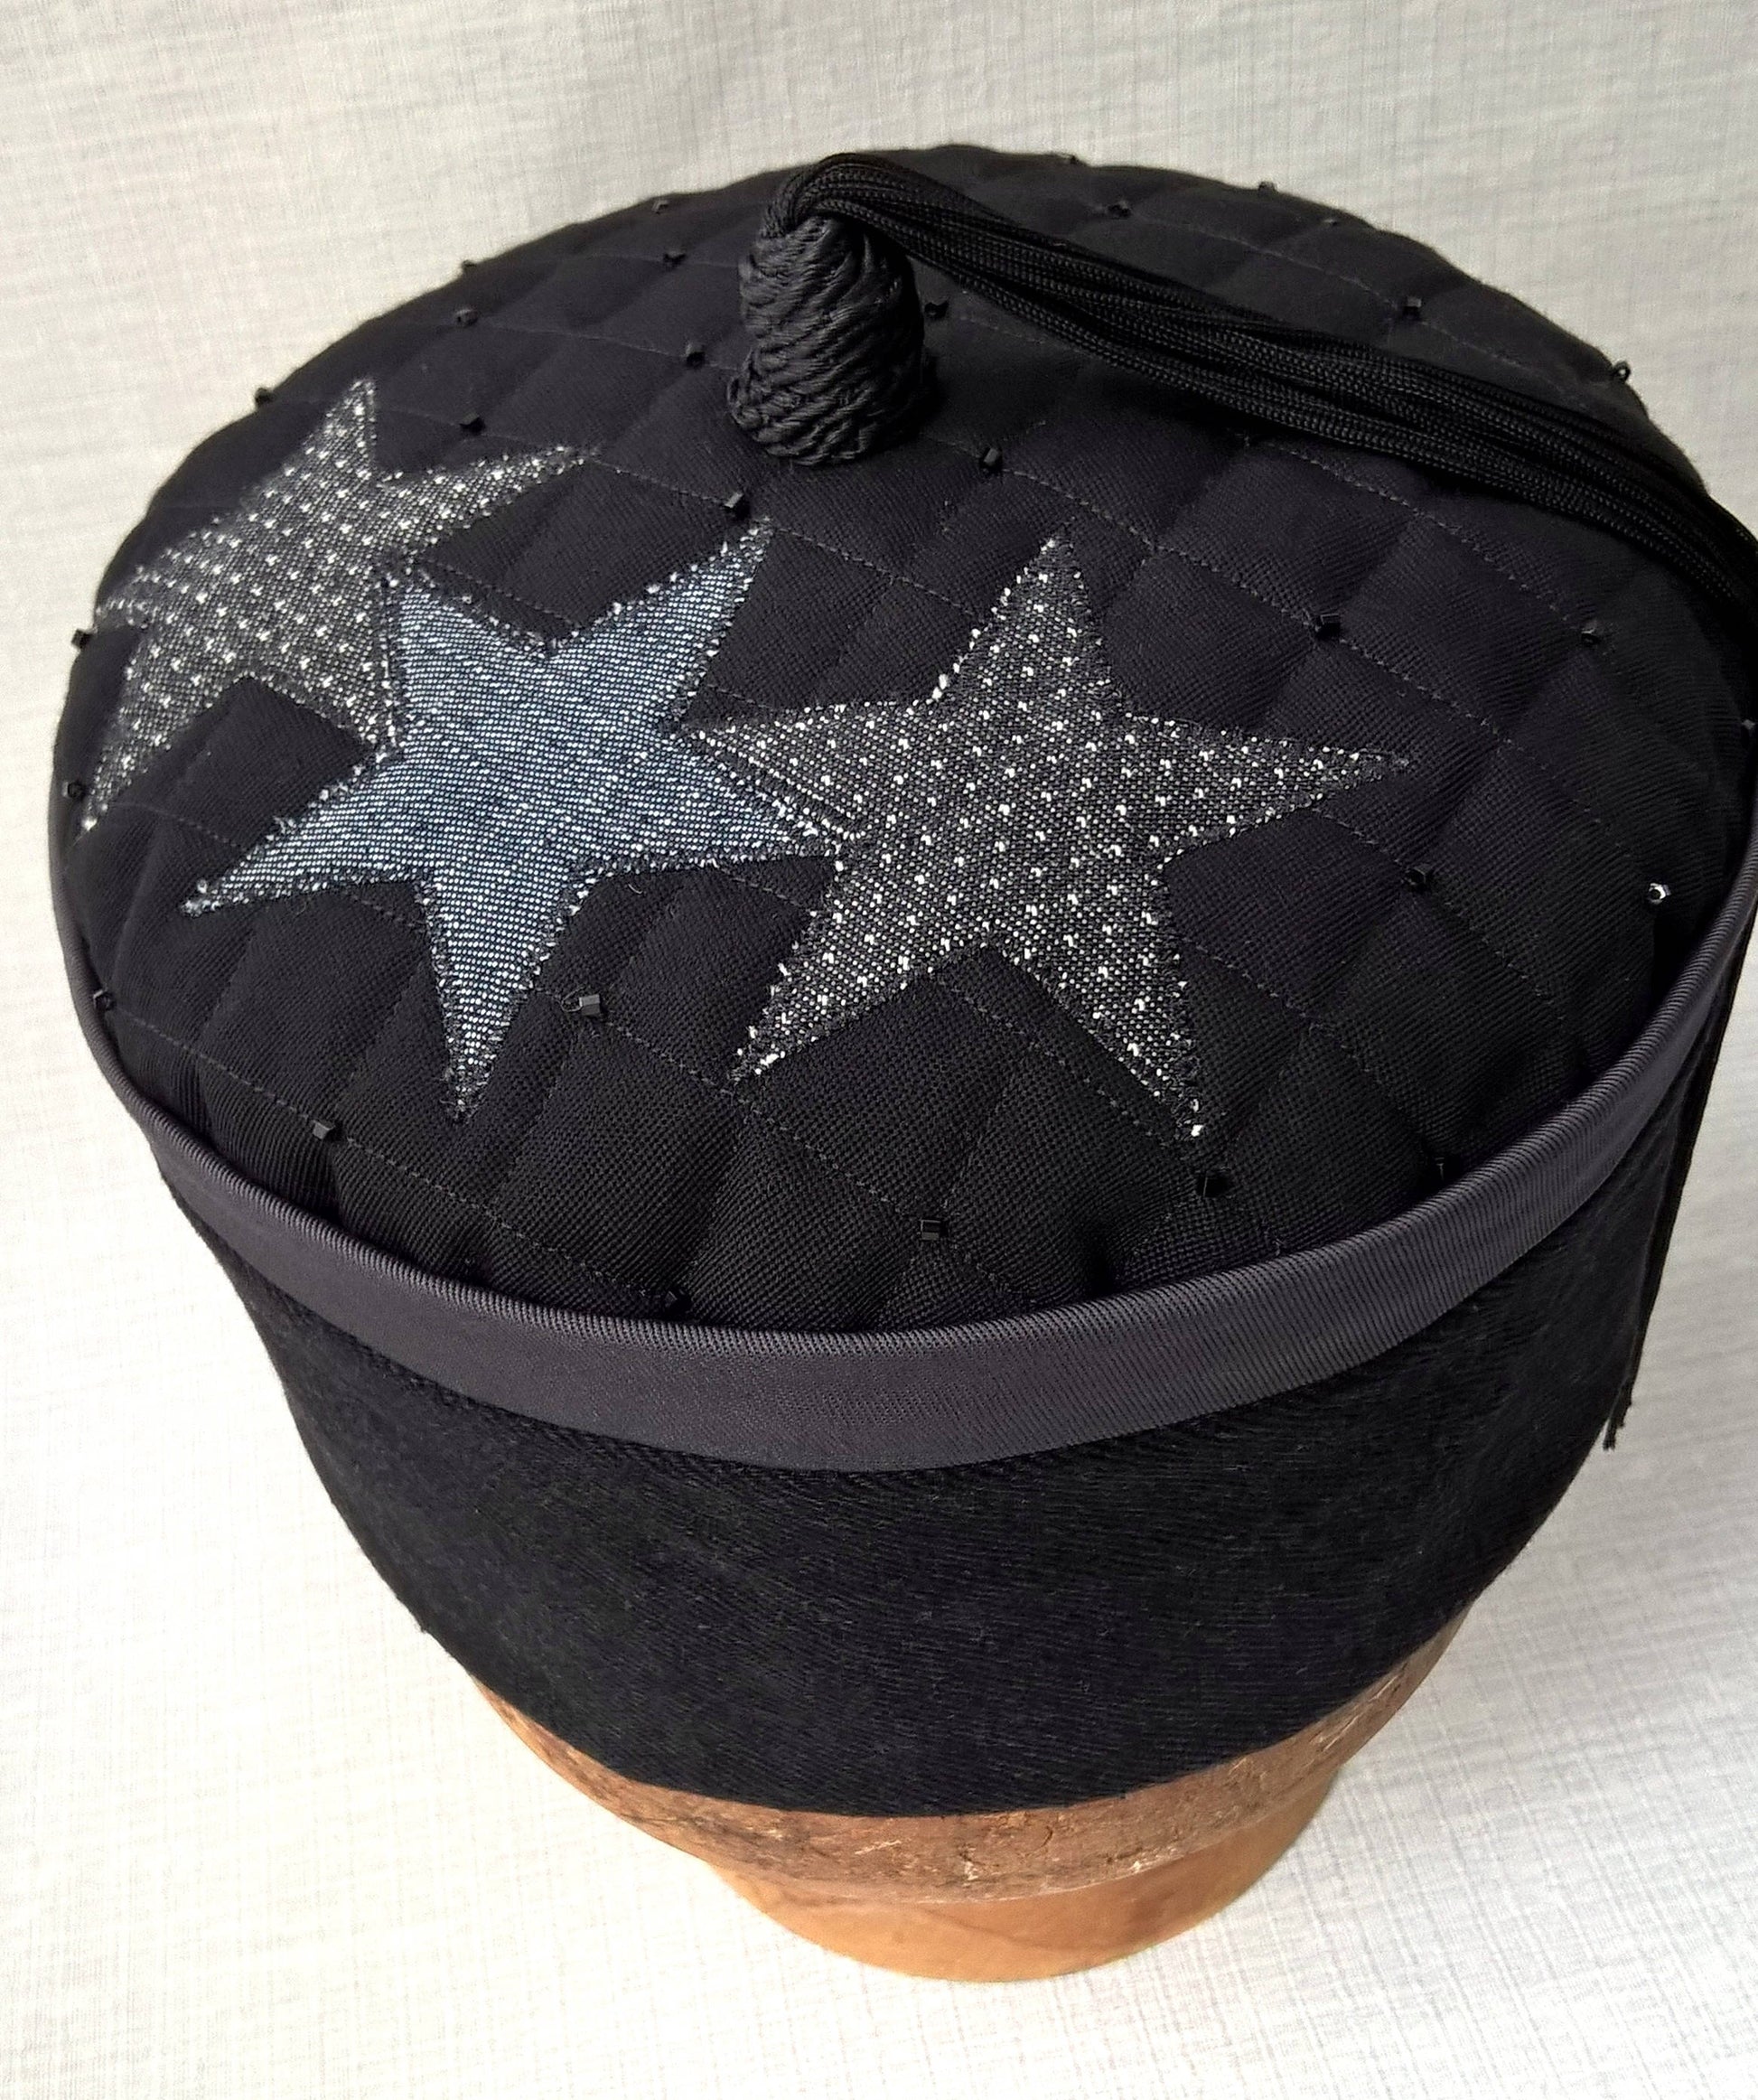 The smoking cap has a uniquely quilted and beaded tip with applique denim stars